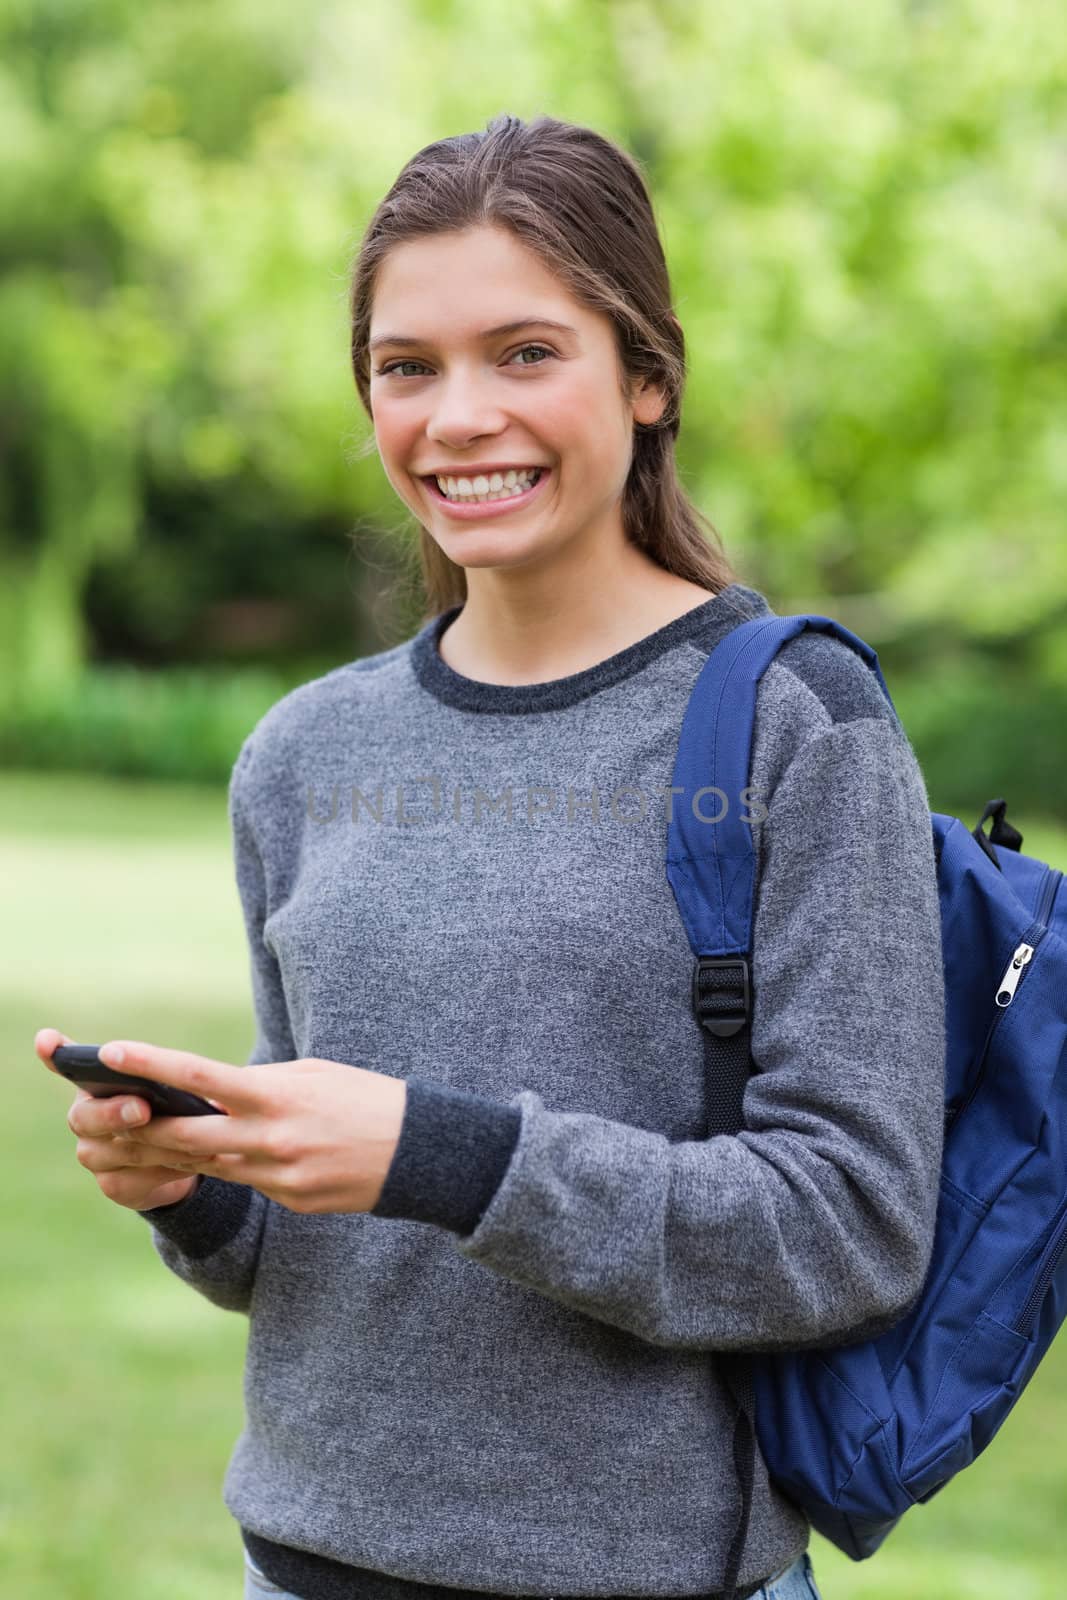 Smiling teenage girl standing upright while sending a text by Wavebreakmedia